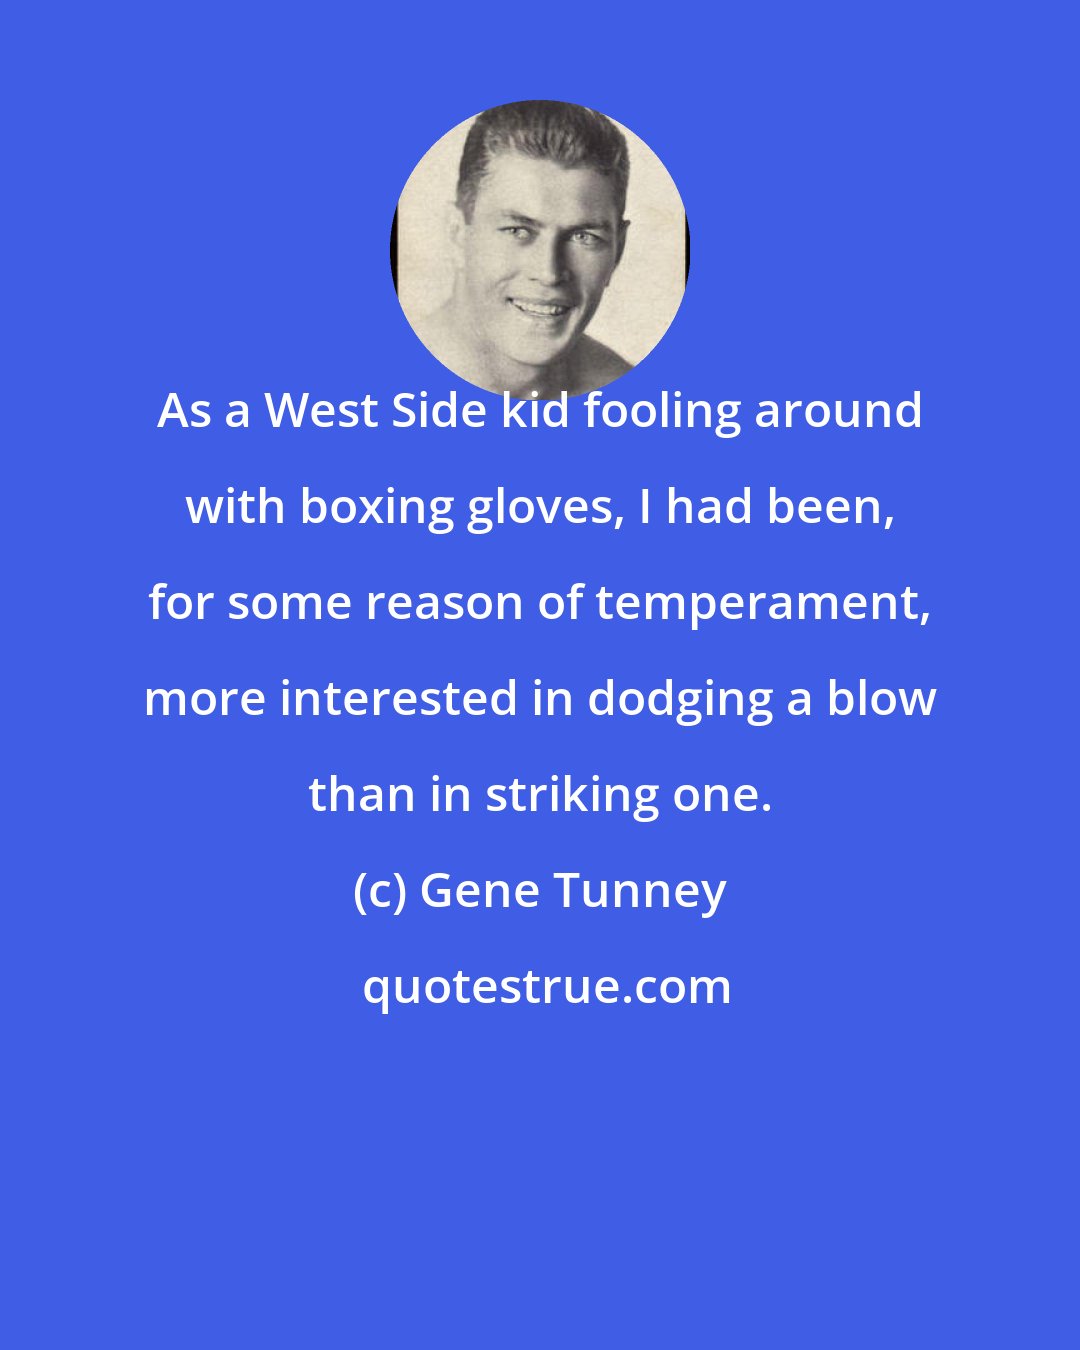 Gene Tunney: As a West Side kid fooling around with boxing gloves, I had been, for some reason of temperament, more interested in dodging a blow than in striking one.